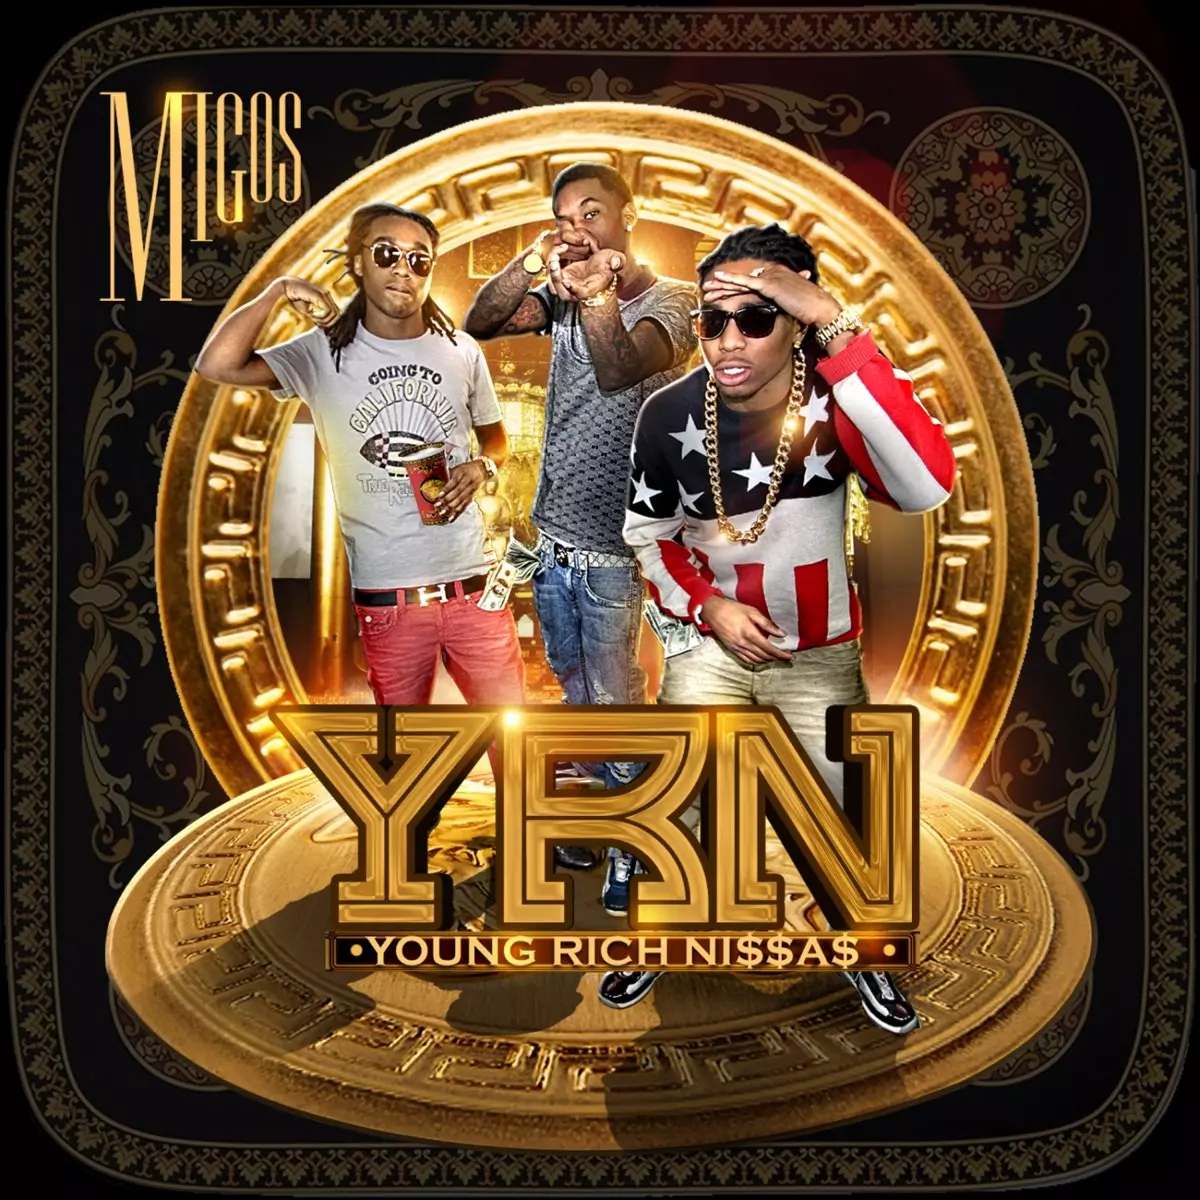 Young Rich N*ggas - Album by Migos - Apple Music